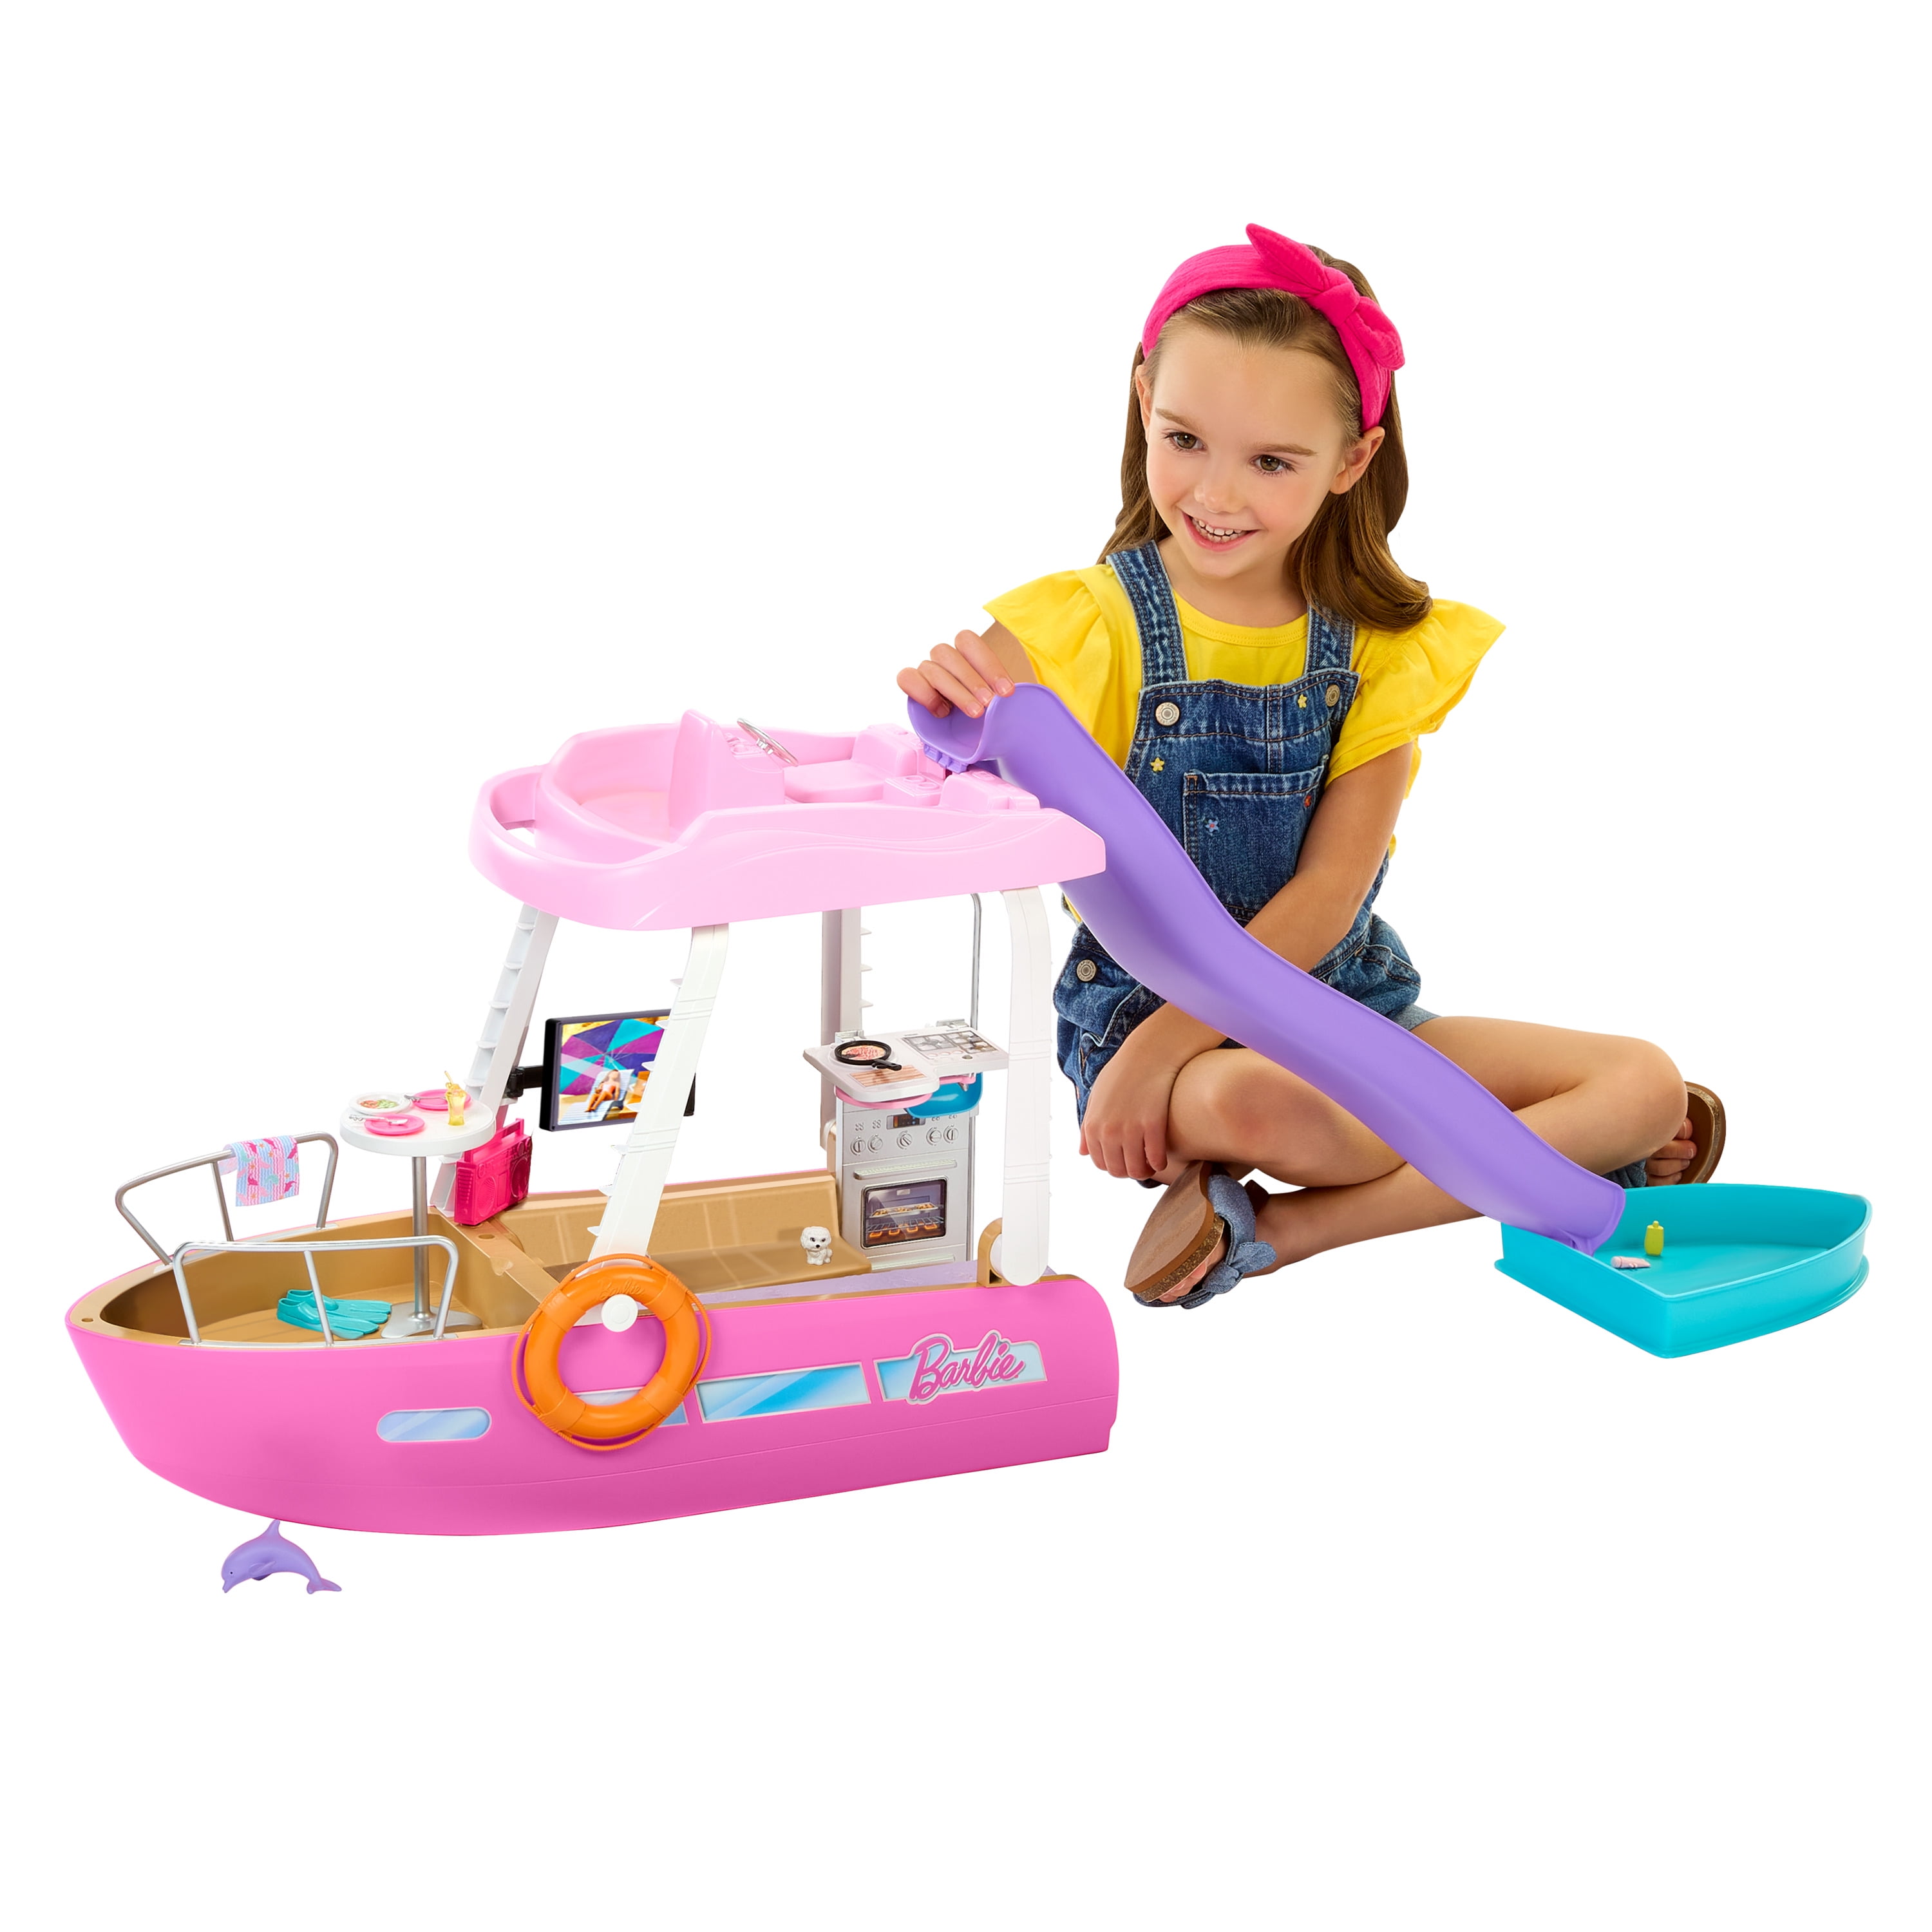 Barbie Dream Boat Playset with 20+ Accessories Including Dolphin, Pool